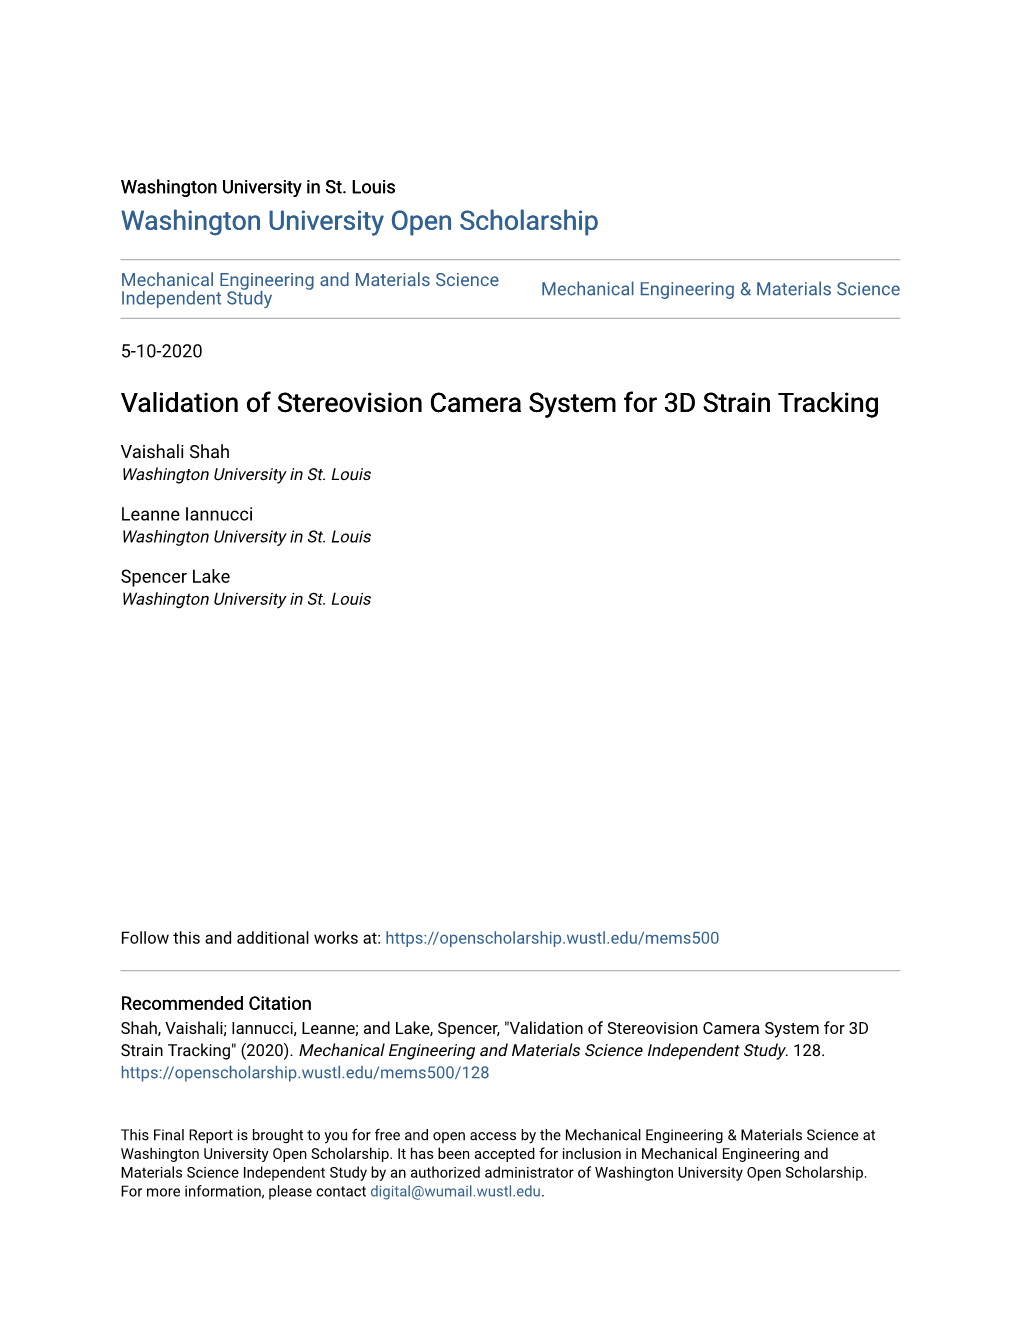 Validation of Stereovision Camera System for 3D Strain Tracking